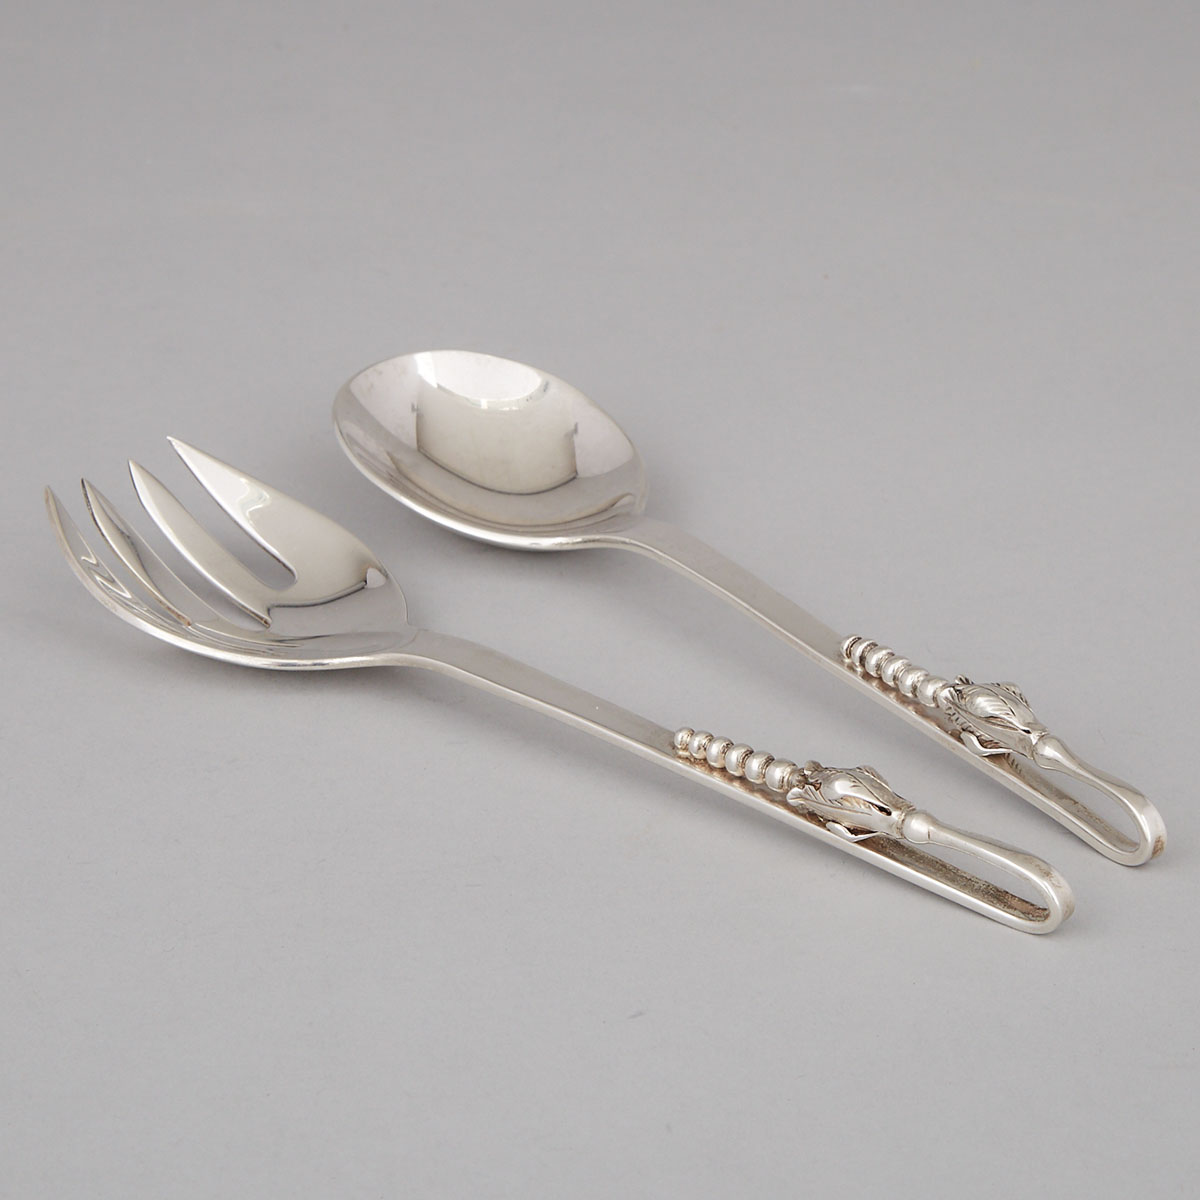 Pair of Mexican Silver Salad Servers, Sanborns, Mexico City, mid-20th century